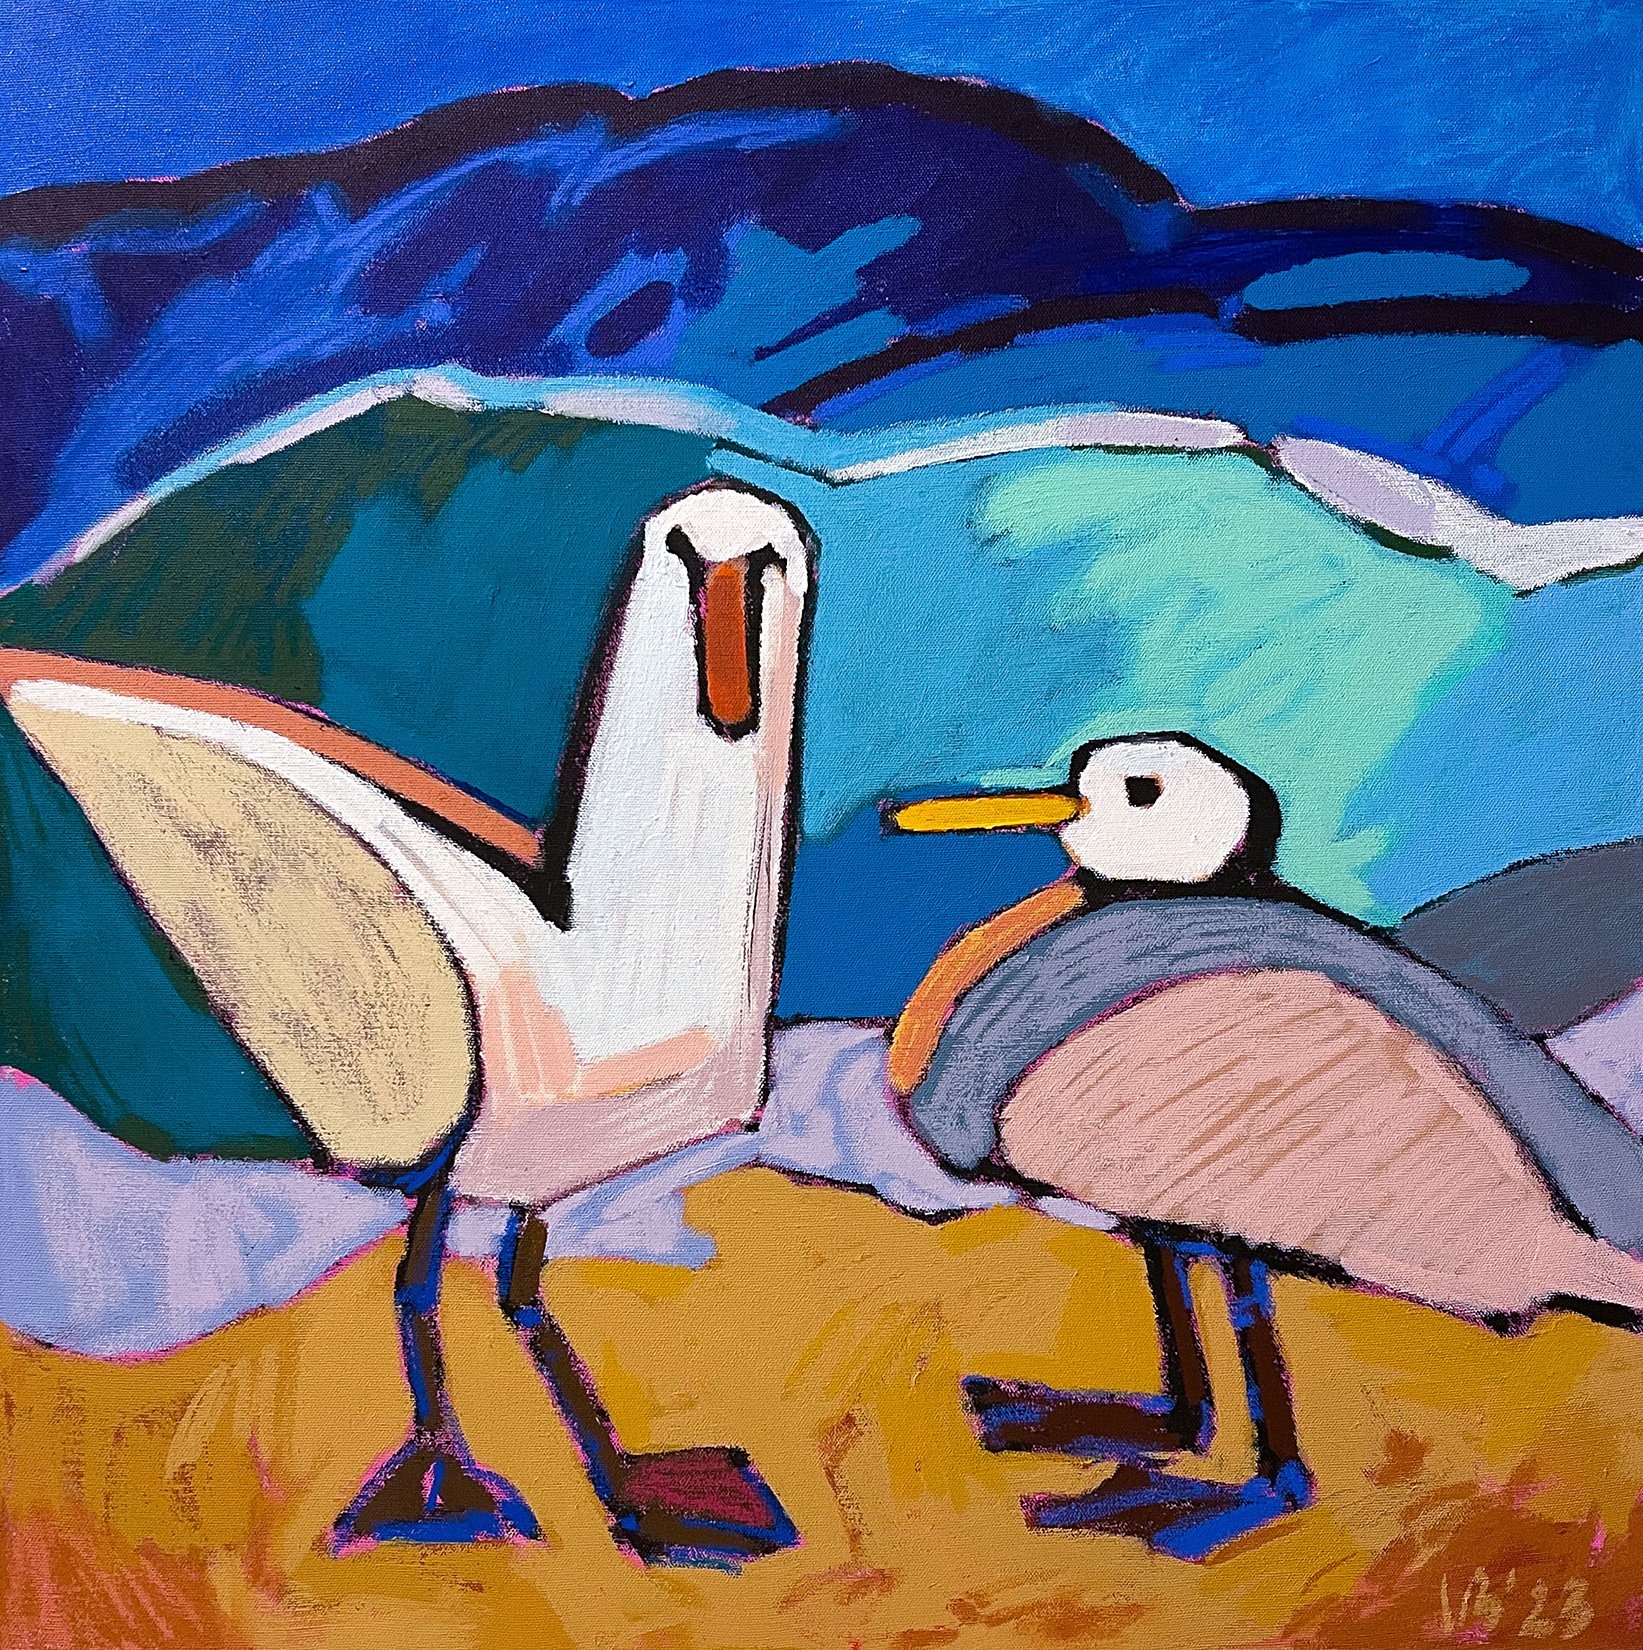 Study of Two Seagulls, 2023 - tempera sticks on canvas, 24x24in